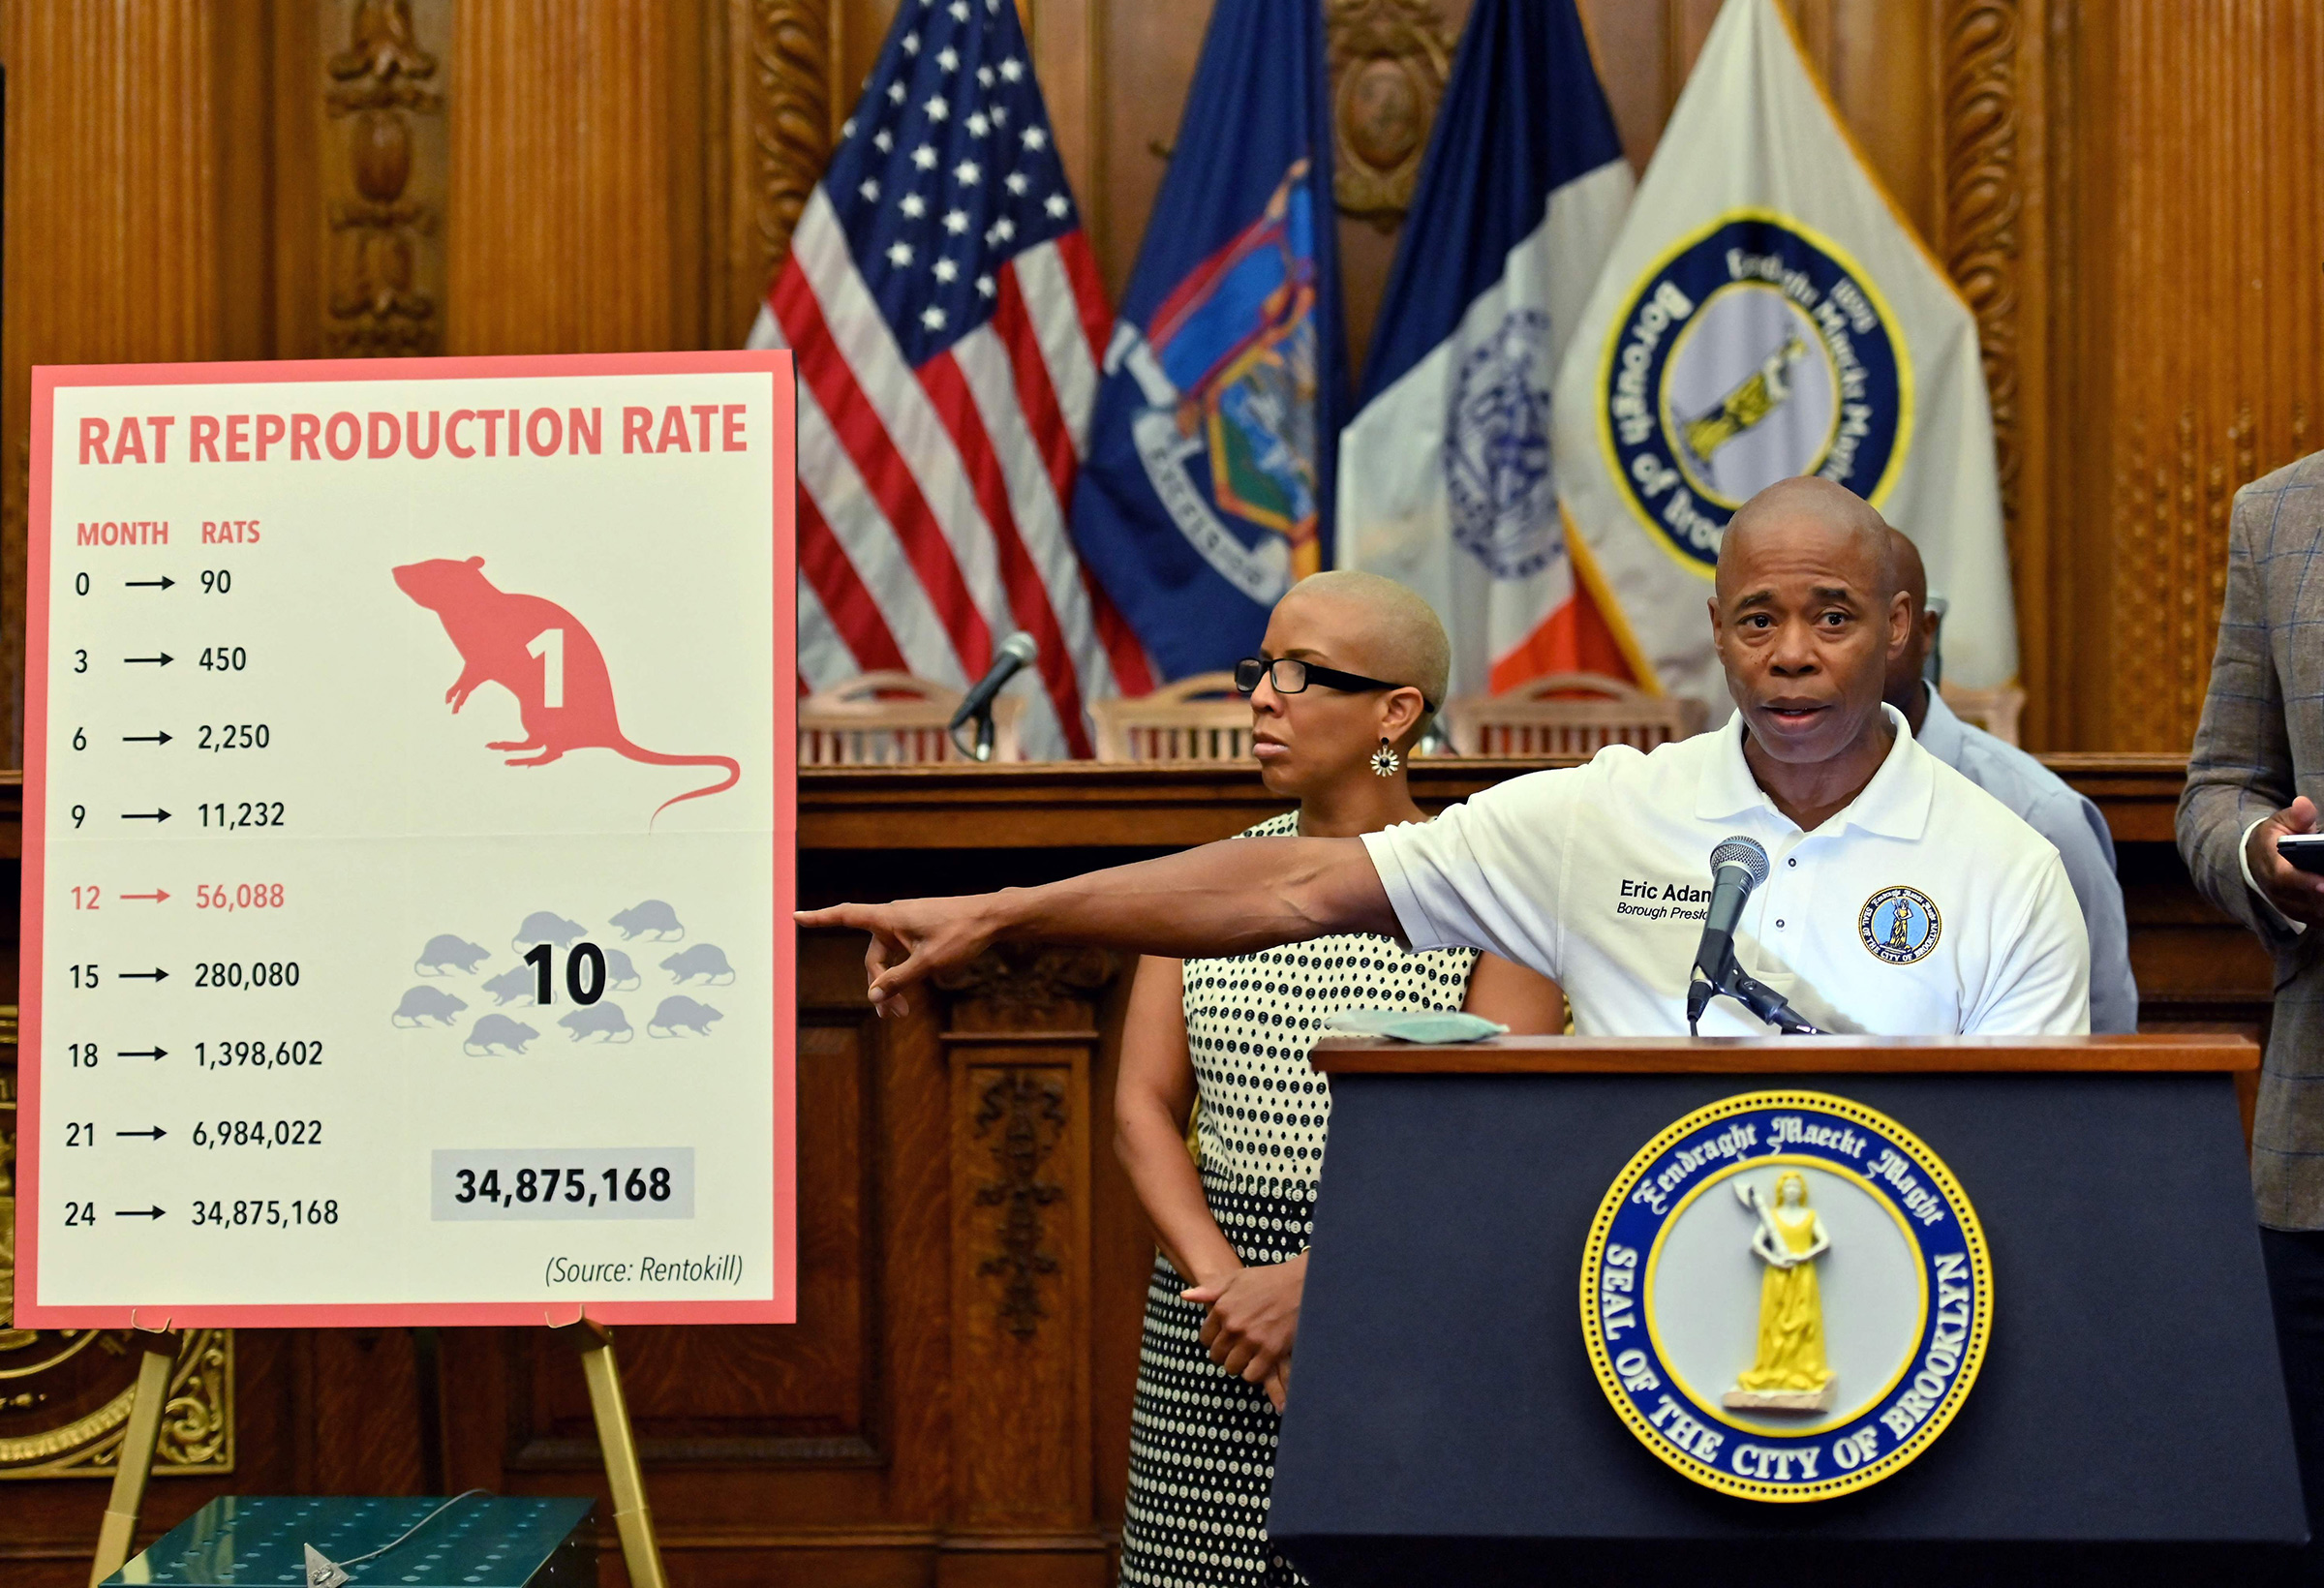 In September 2019, then Brooklyn borough President Eric Adams announces the results of a pilot program aimed at curbing the rat population in New York. In December, Mayor Adams' administration posted a job listing for Director of Rodent Mitigation, a position that pays between $120,000 and $170,000 a year. (Angela Weiss—AFP/Getty Images)